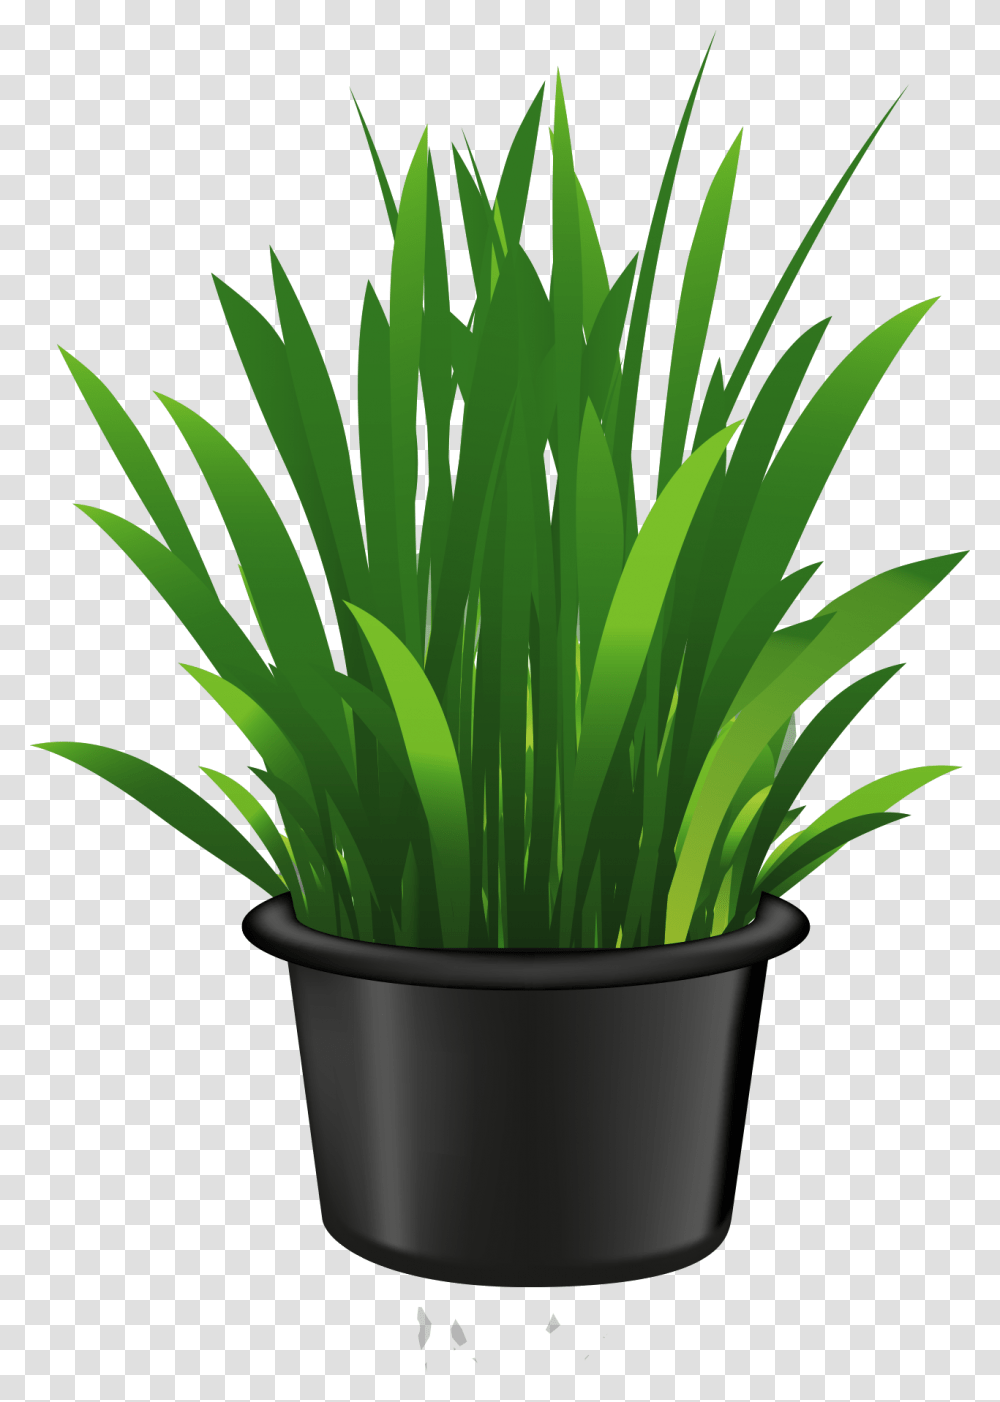 Plants In Pot Clipart, Grass, Flower, Blossom, Bamboo Transparent Png